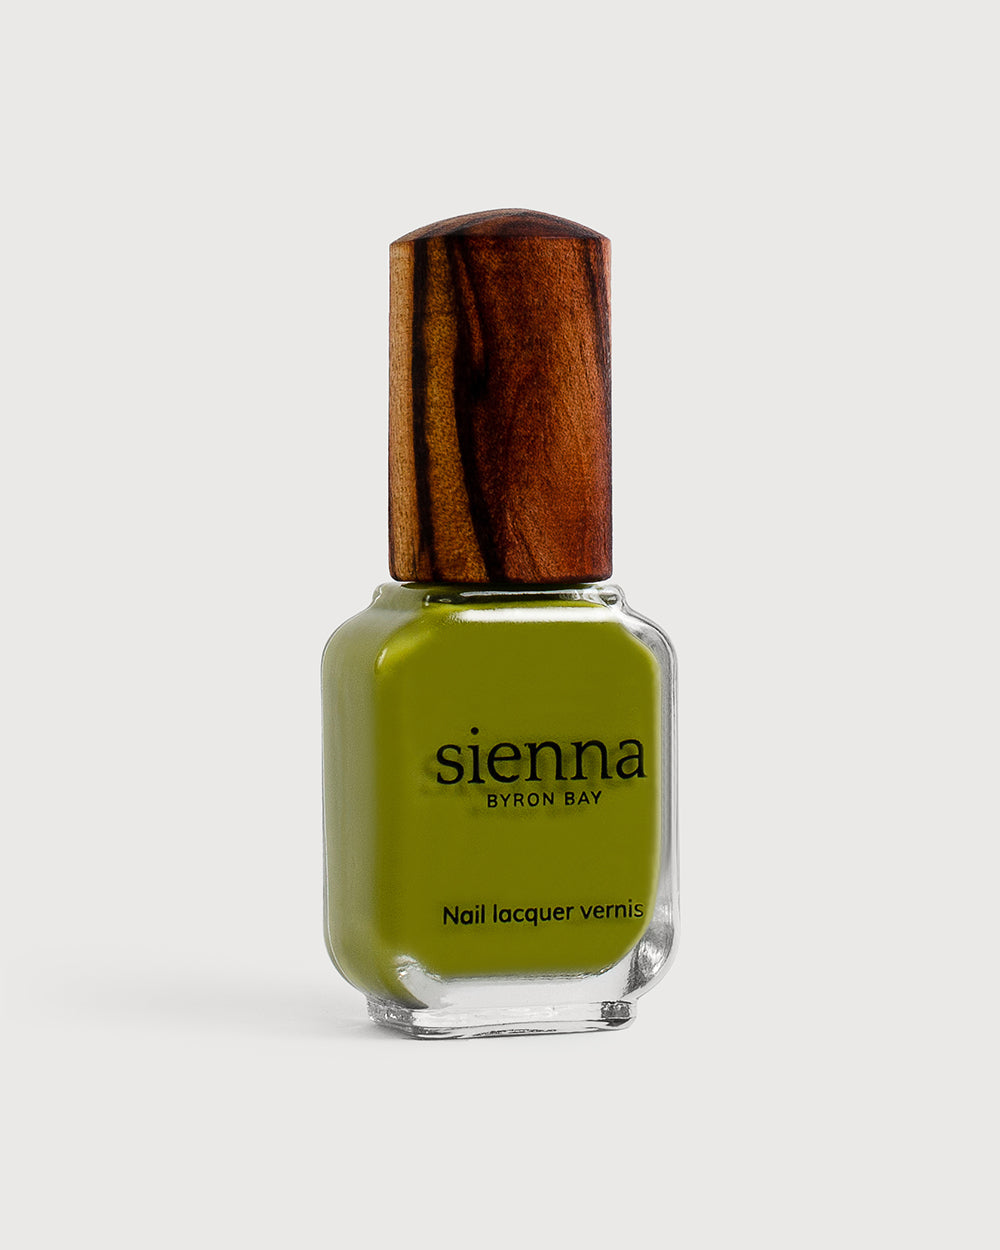 Avocado green nail polish glass bottle with timber cap